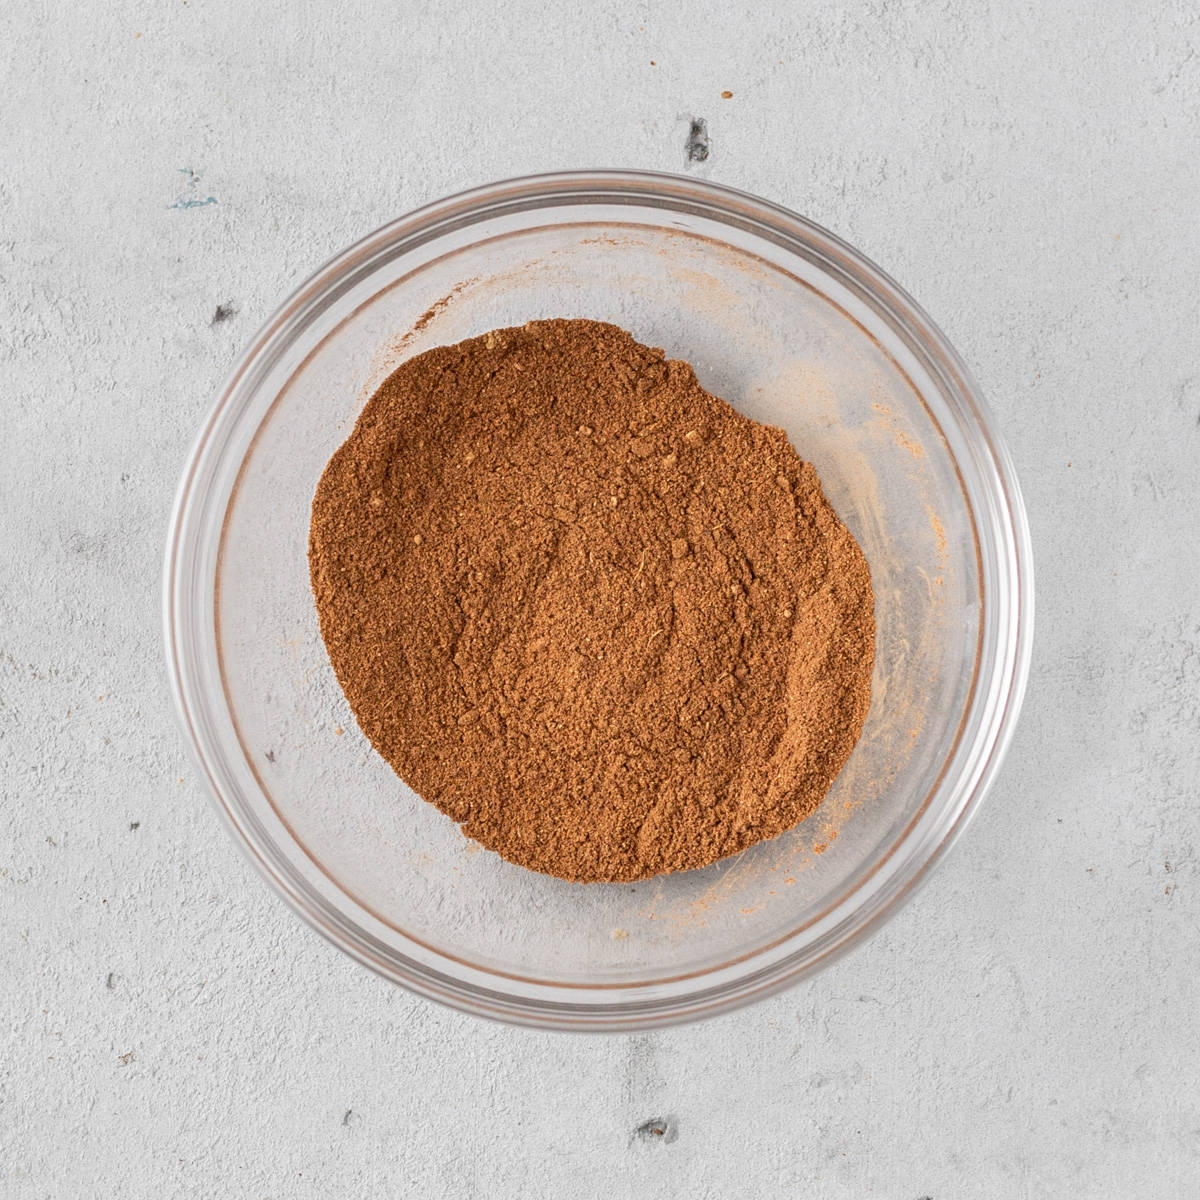 the homemade pumpkin pie spice combined in a glass bowl on a grey background.